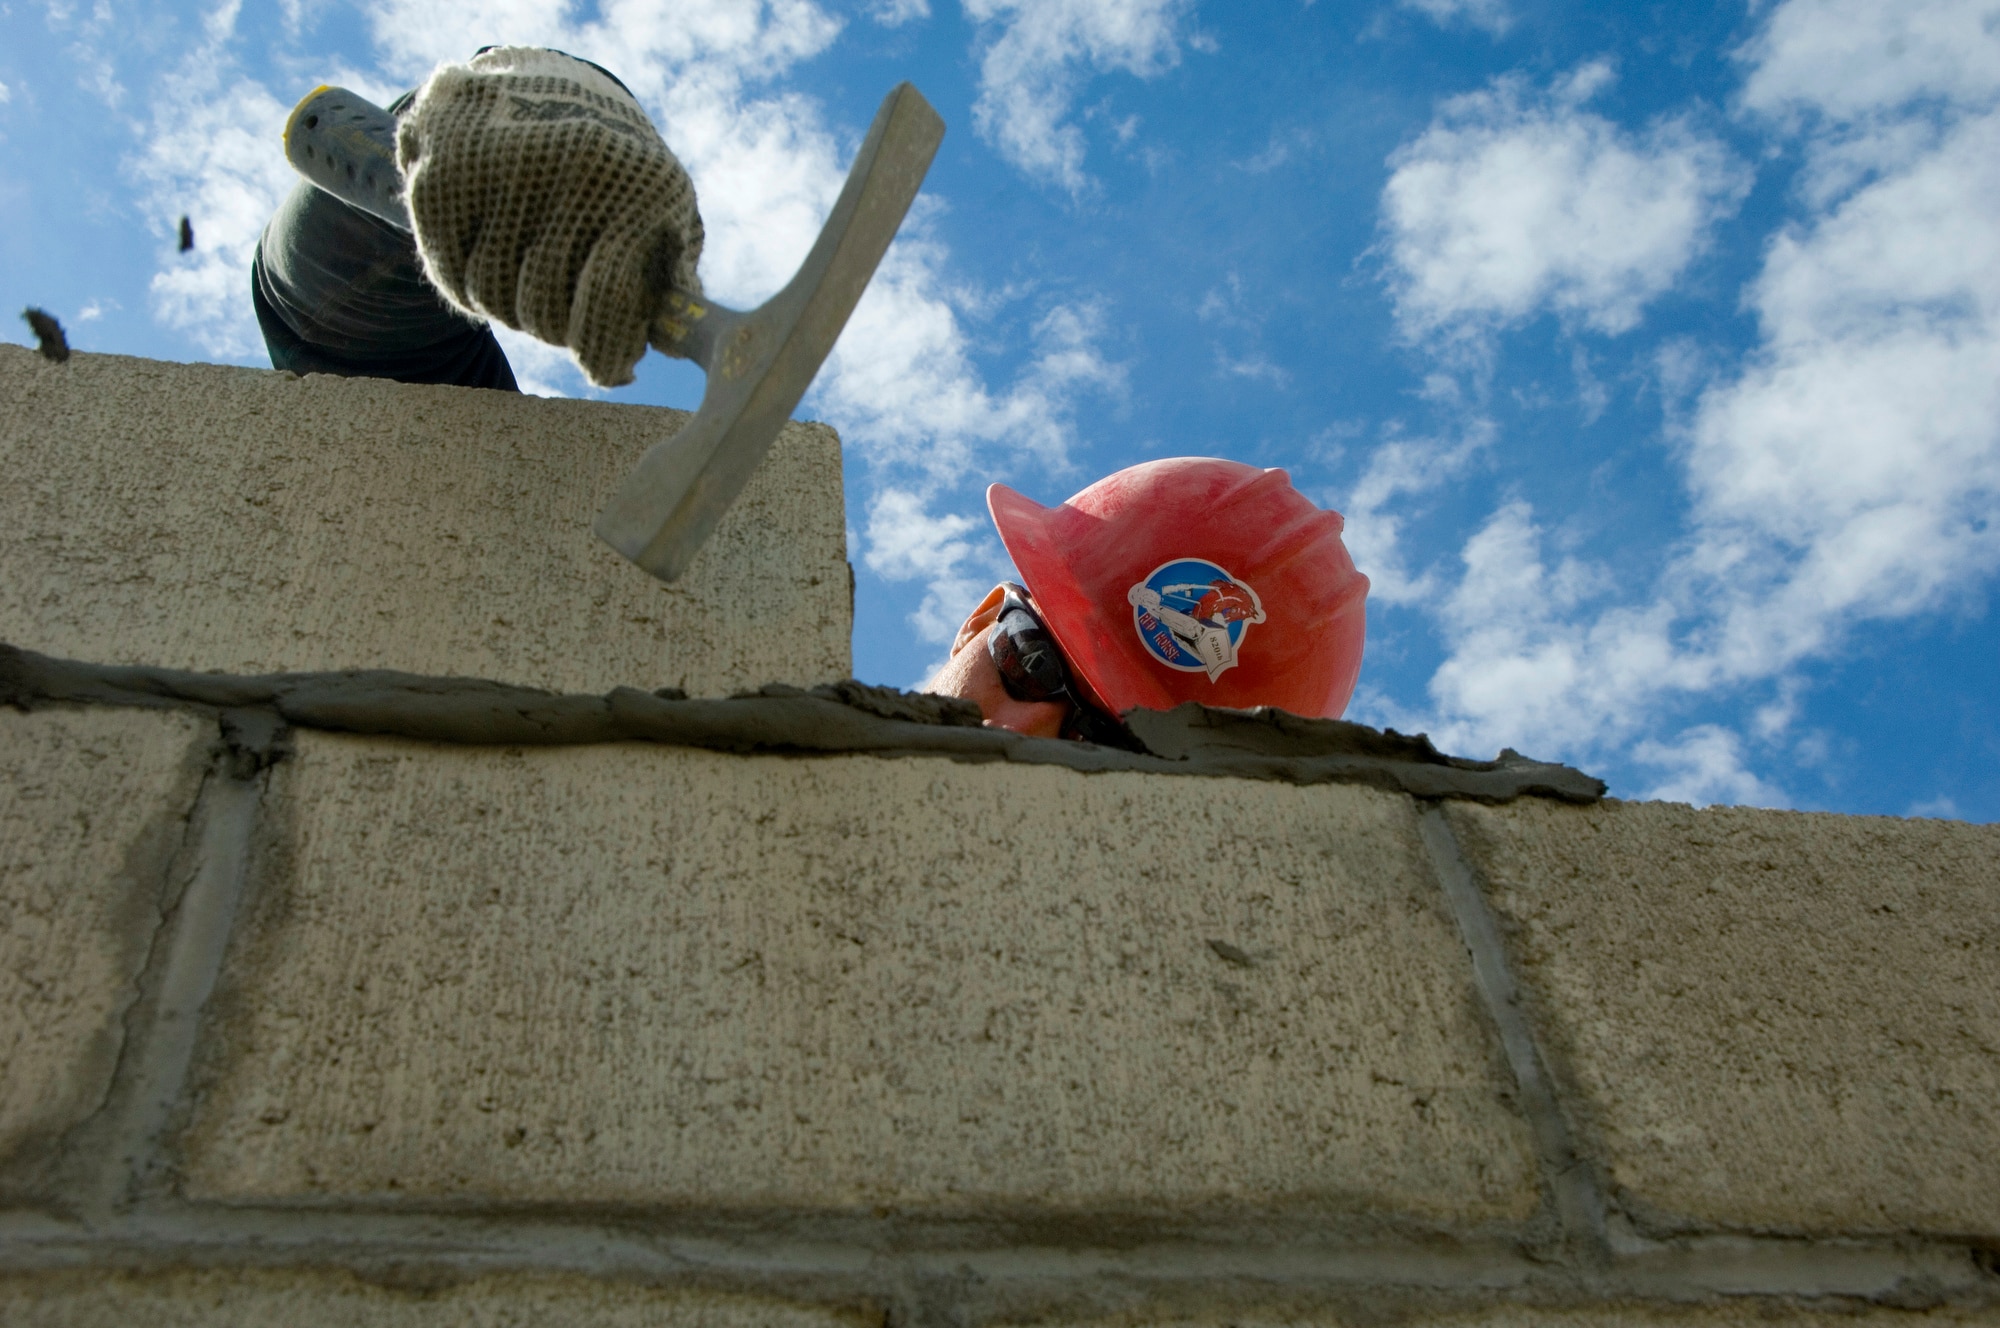 Senior Airman Russell Smith hammers a cinder block into position for the building of a medical clinic in Yanama, Peru, June 23 during New Horizons-Peru 2008, a U.S. and Peruvian partnered humanitarian mission set on providing relief to underprivileged Peruvians. Airman Smith is a member of the 820th RED HORSE Squadron at  Nellis Air Force Base, Nev. (U.S. Air Force photo/Staff Sgt. Bennie J. Davis III)